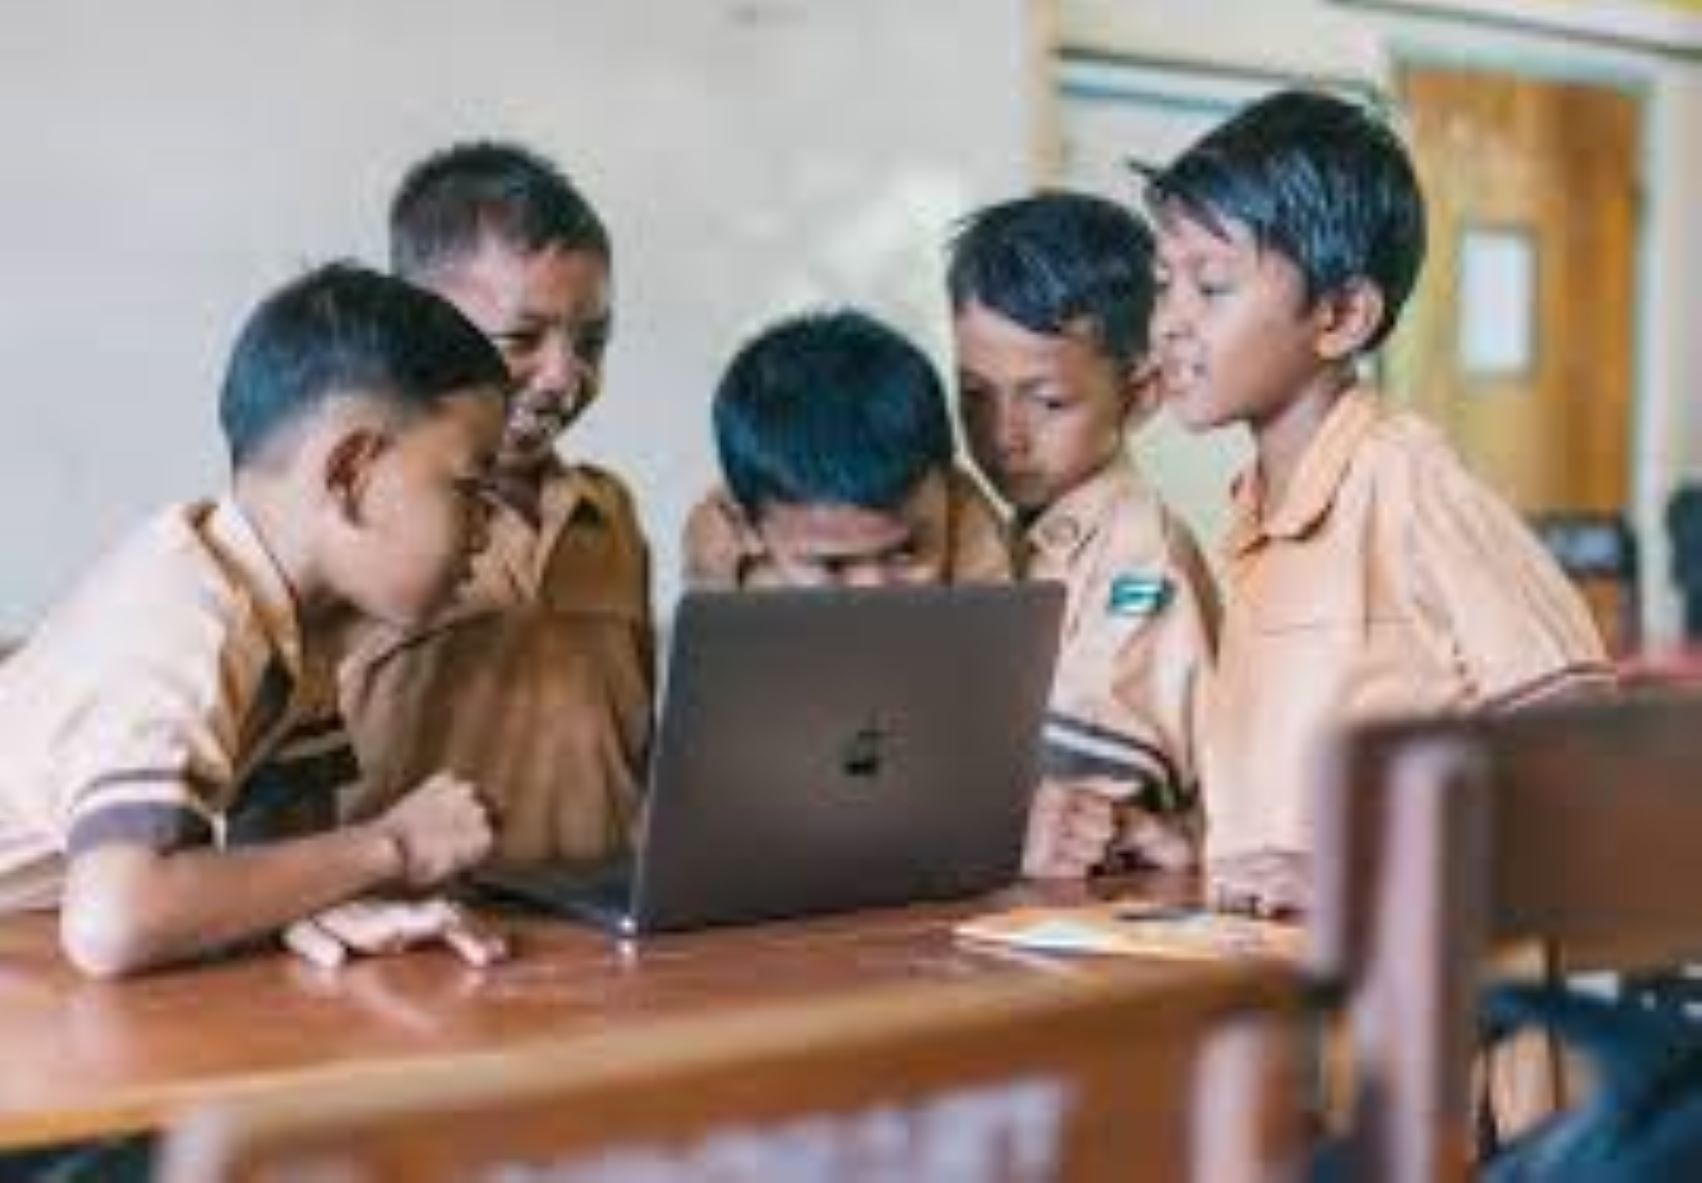 Education Ministry report | At least 40% of schoolchildren in 7 states do not have access to digital devices